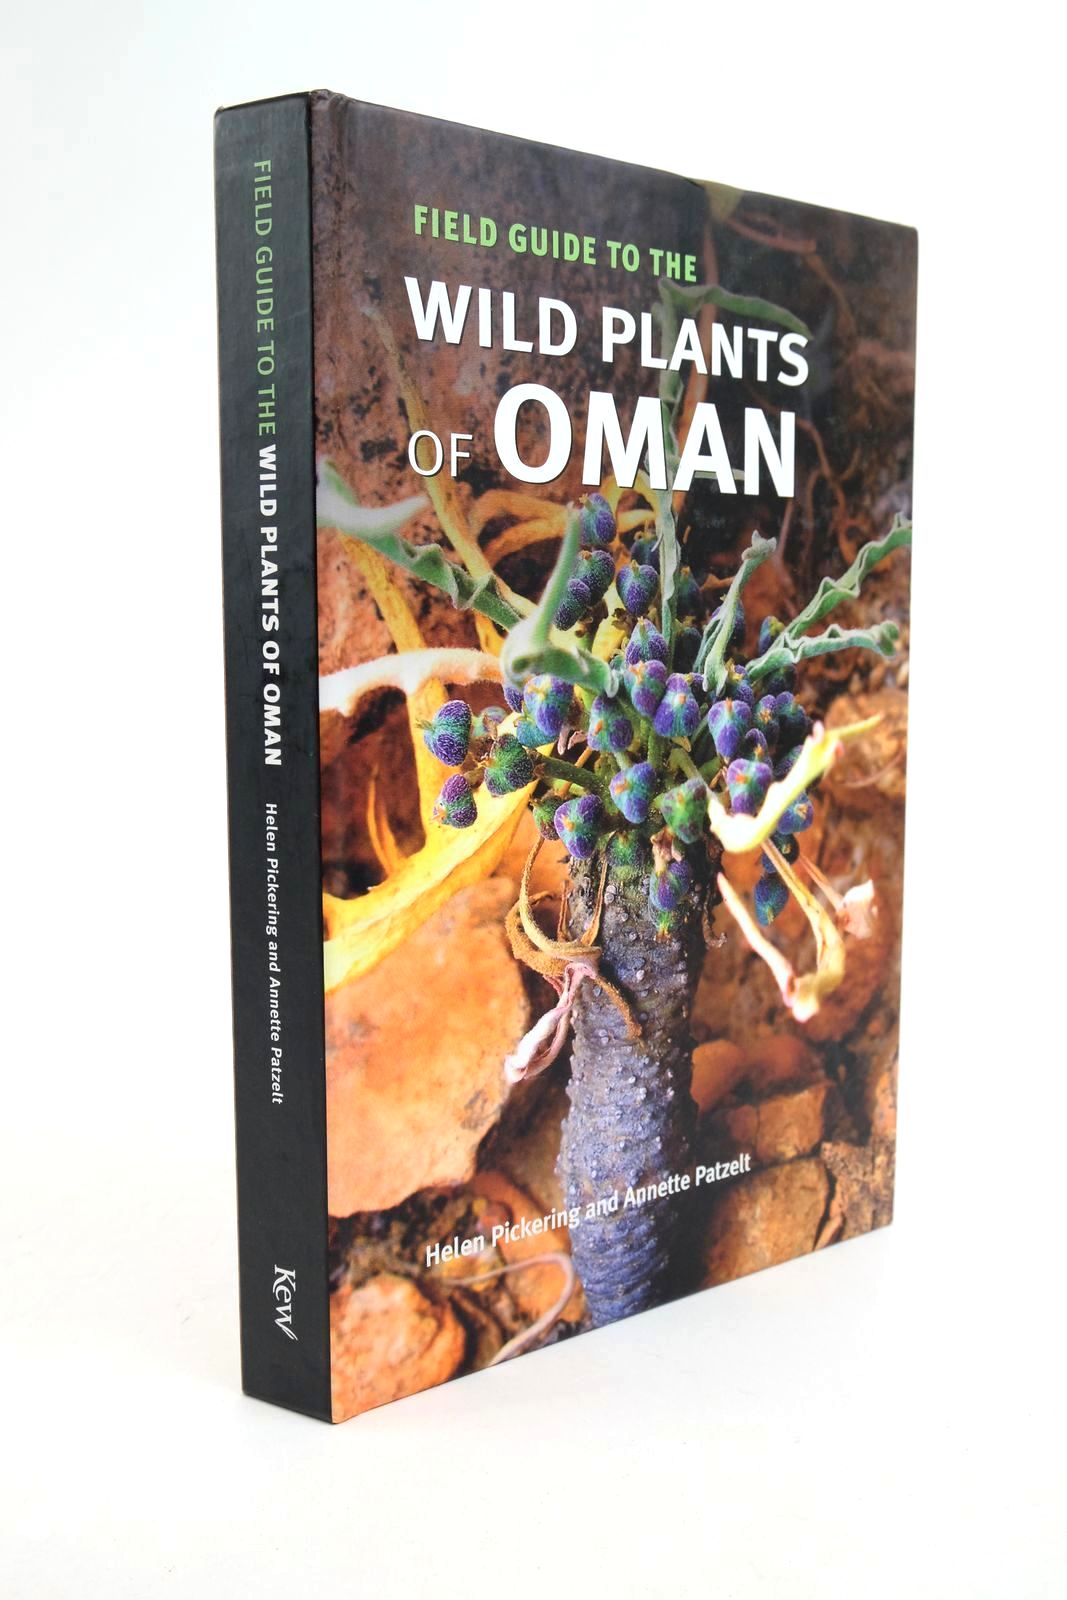 Photo of FIELD GUIDE TO THE WILD PLANTS OF OMAN written by Pickering, Helen Patzelt, Annette published by Kew Publishing (STOCK CODE: 1323006)  for sale by Stella & Rose's Books